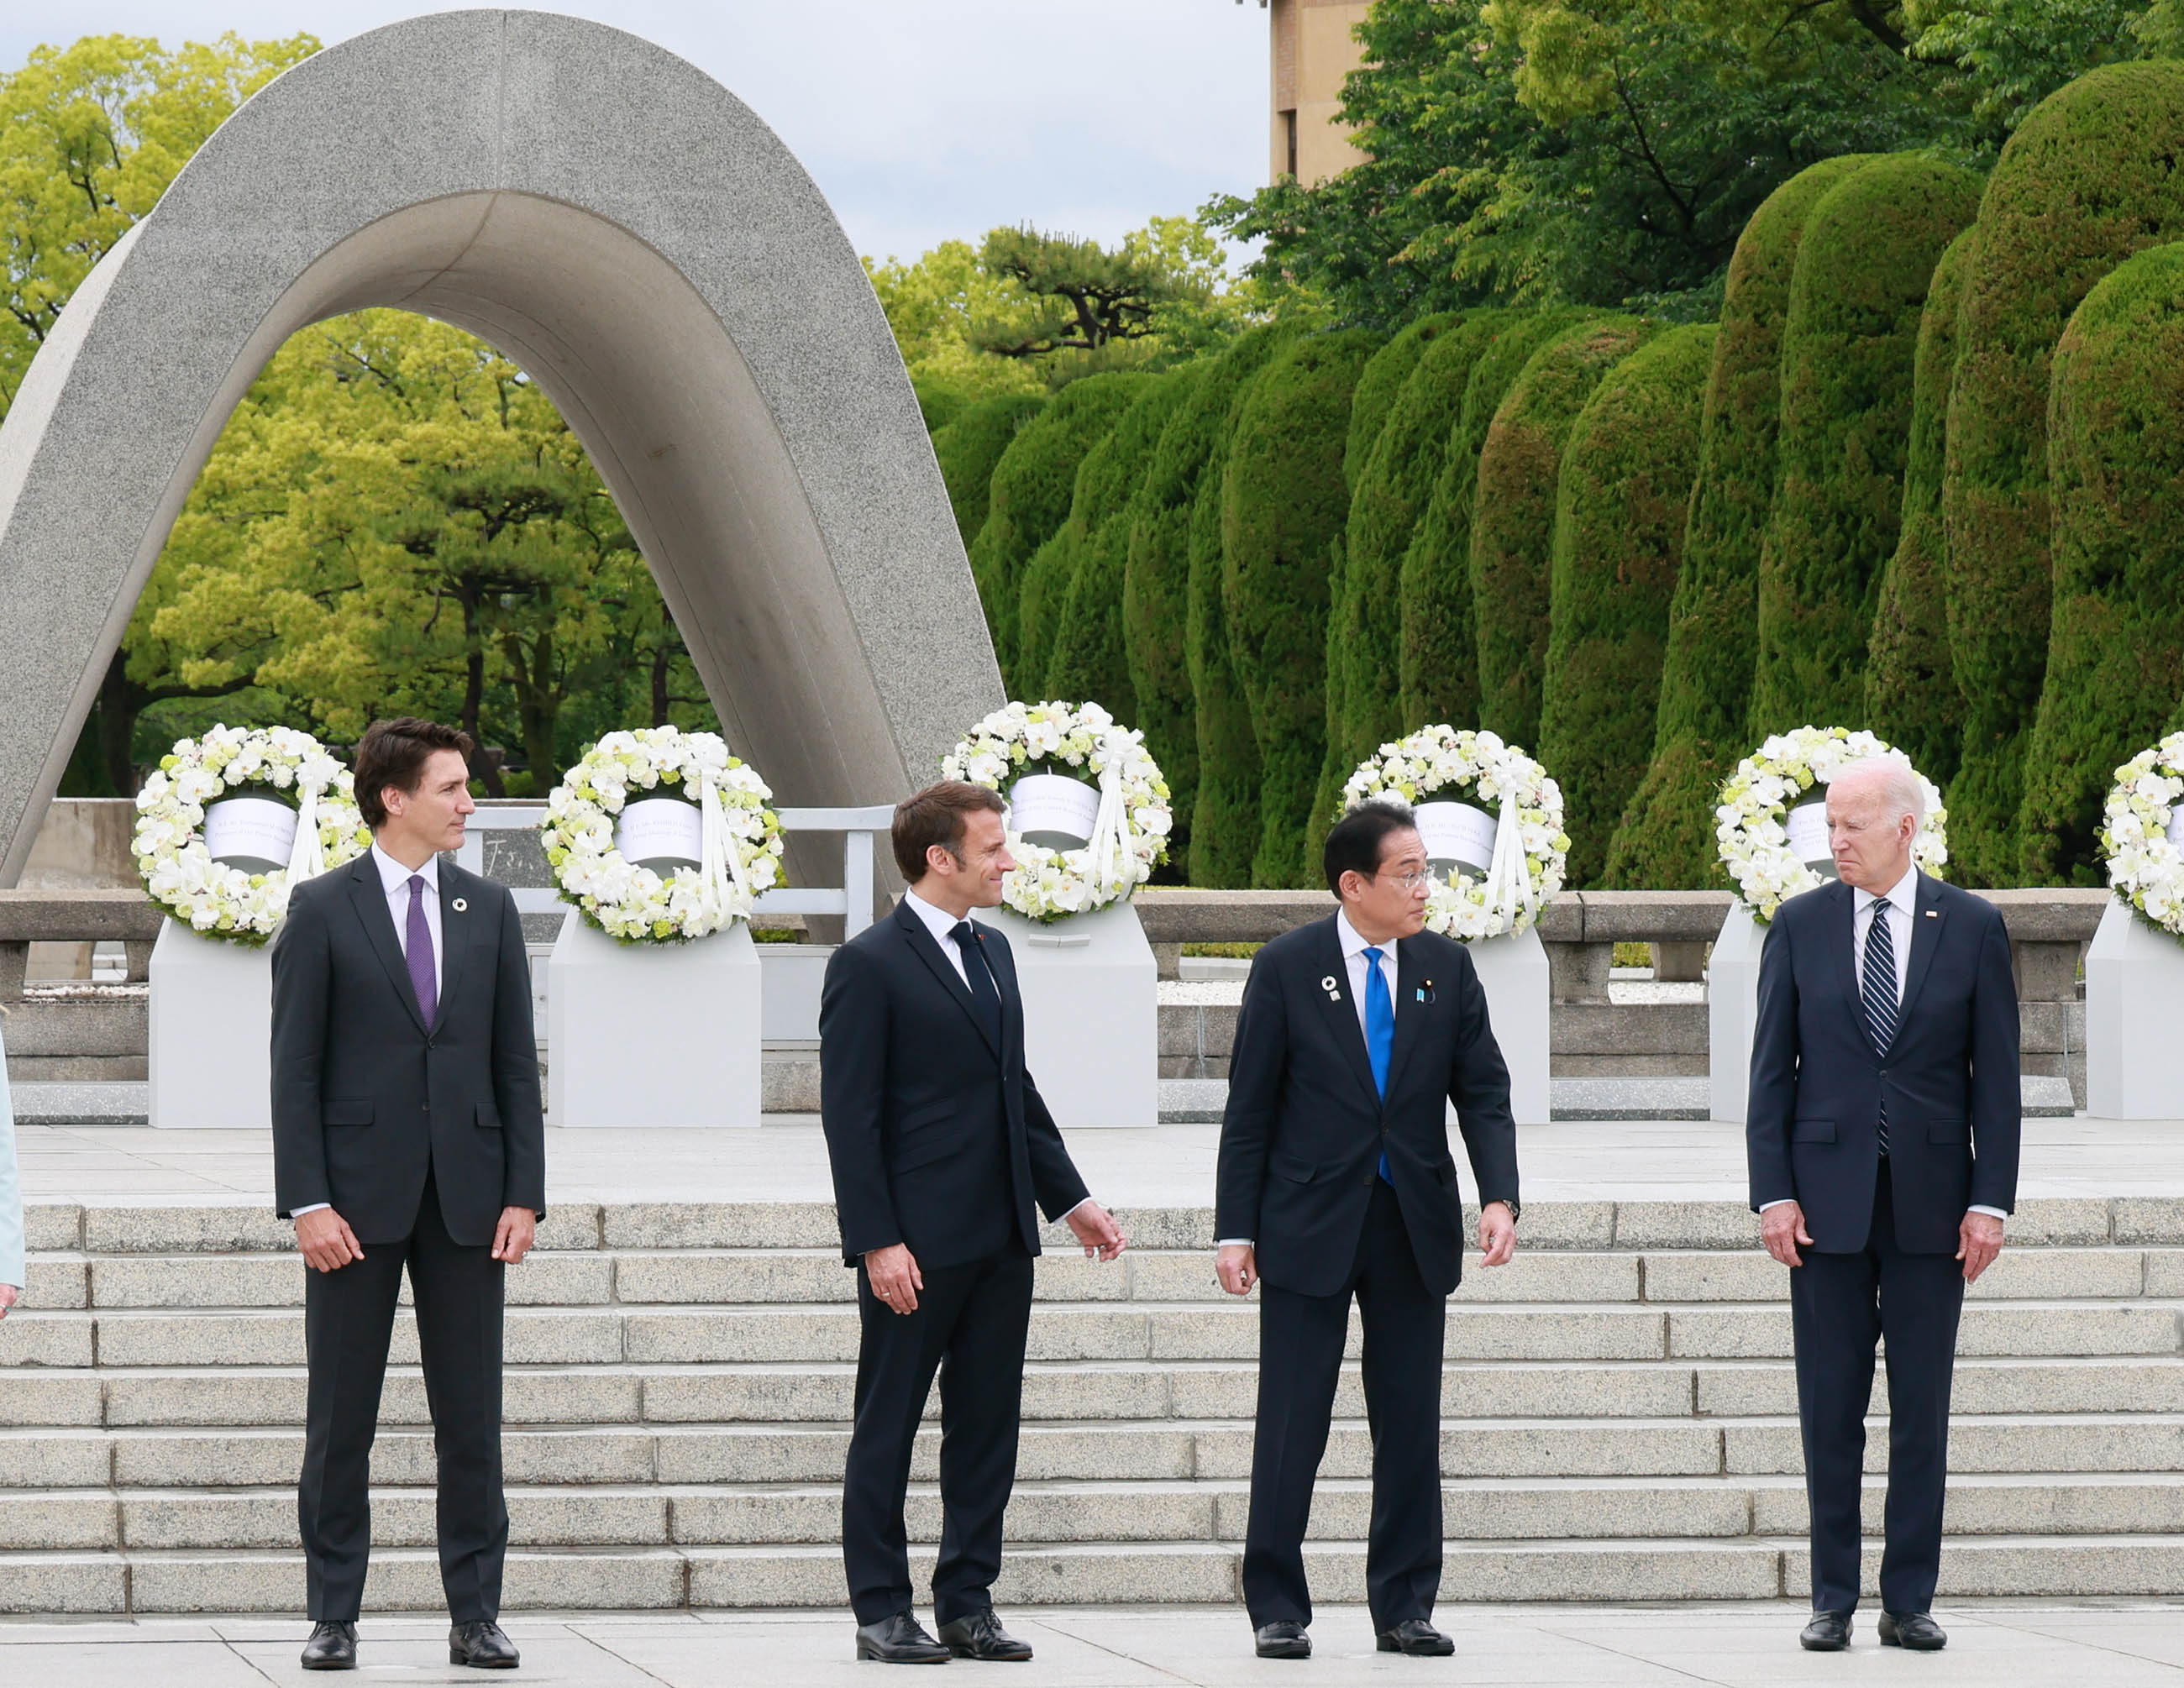 Prime Minister Kishida offering flowers at the Cenotaph for the Atomic Bomb Victims (4)